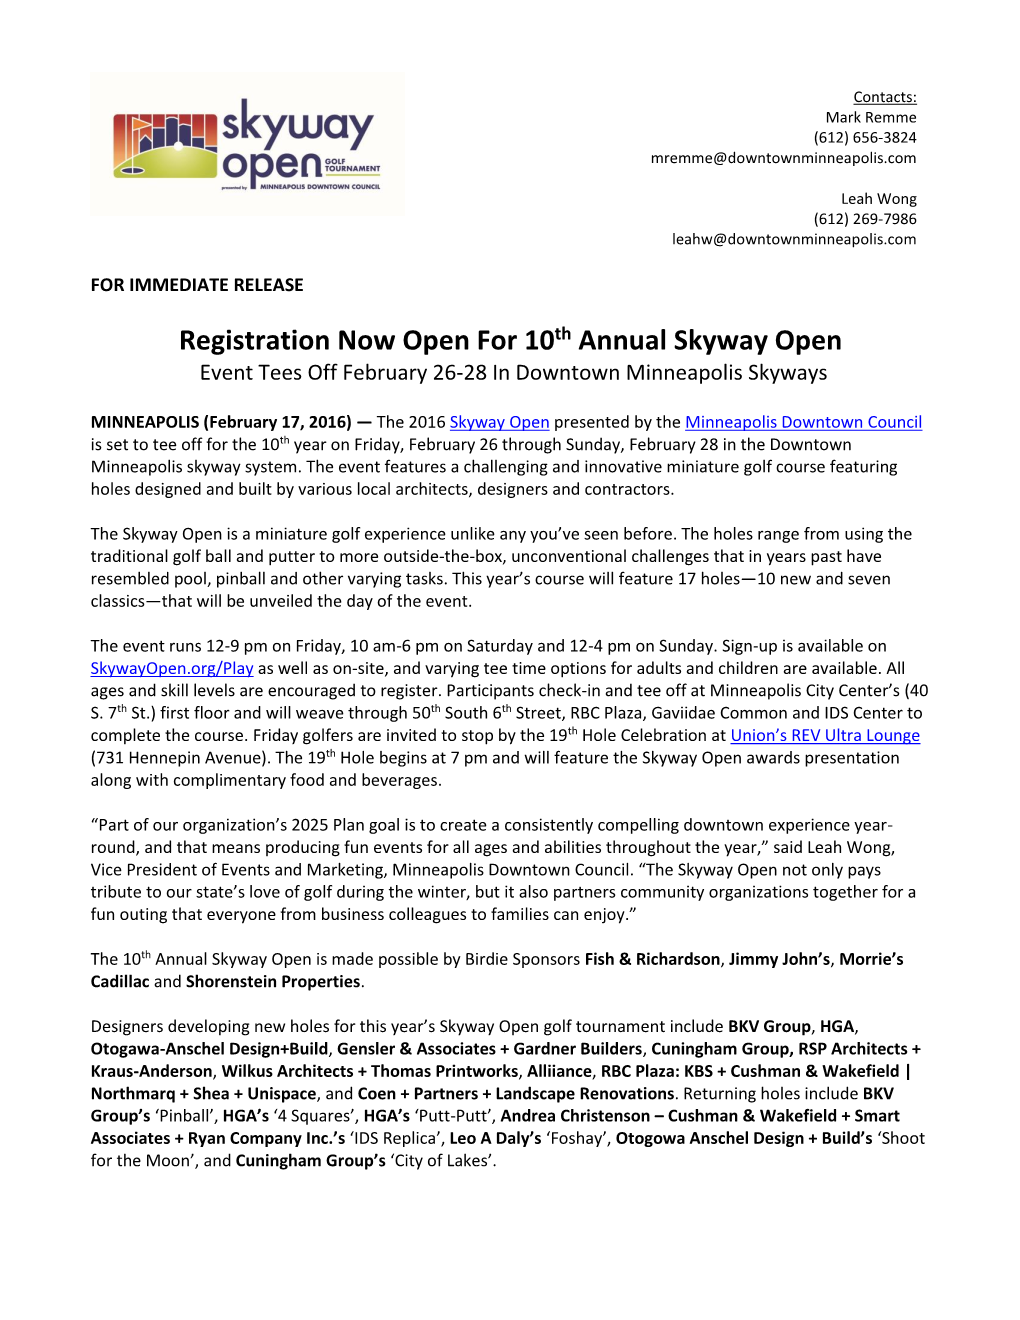 Registration Now Open for 10Th Annual Skyway Open Event Tees Off February 26-28 in Downtown Minneapolis Skyways